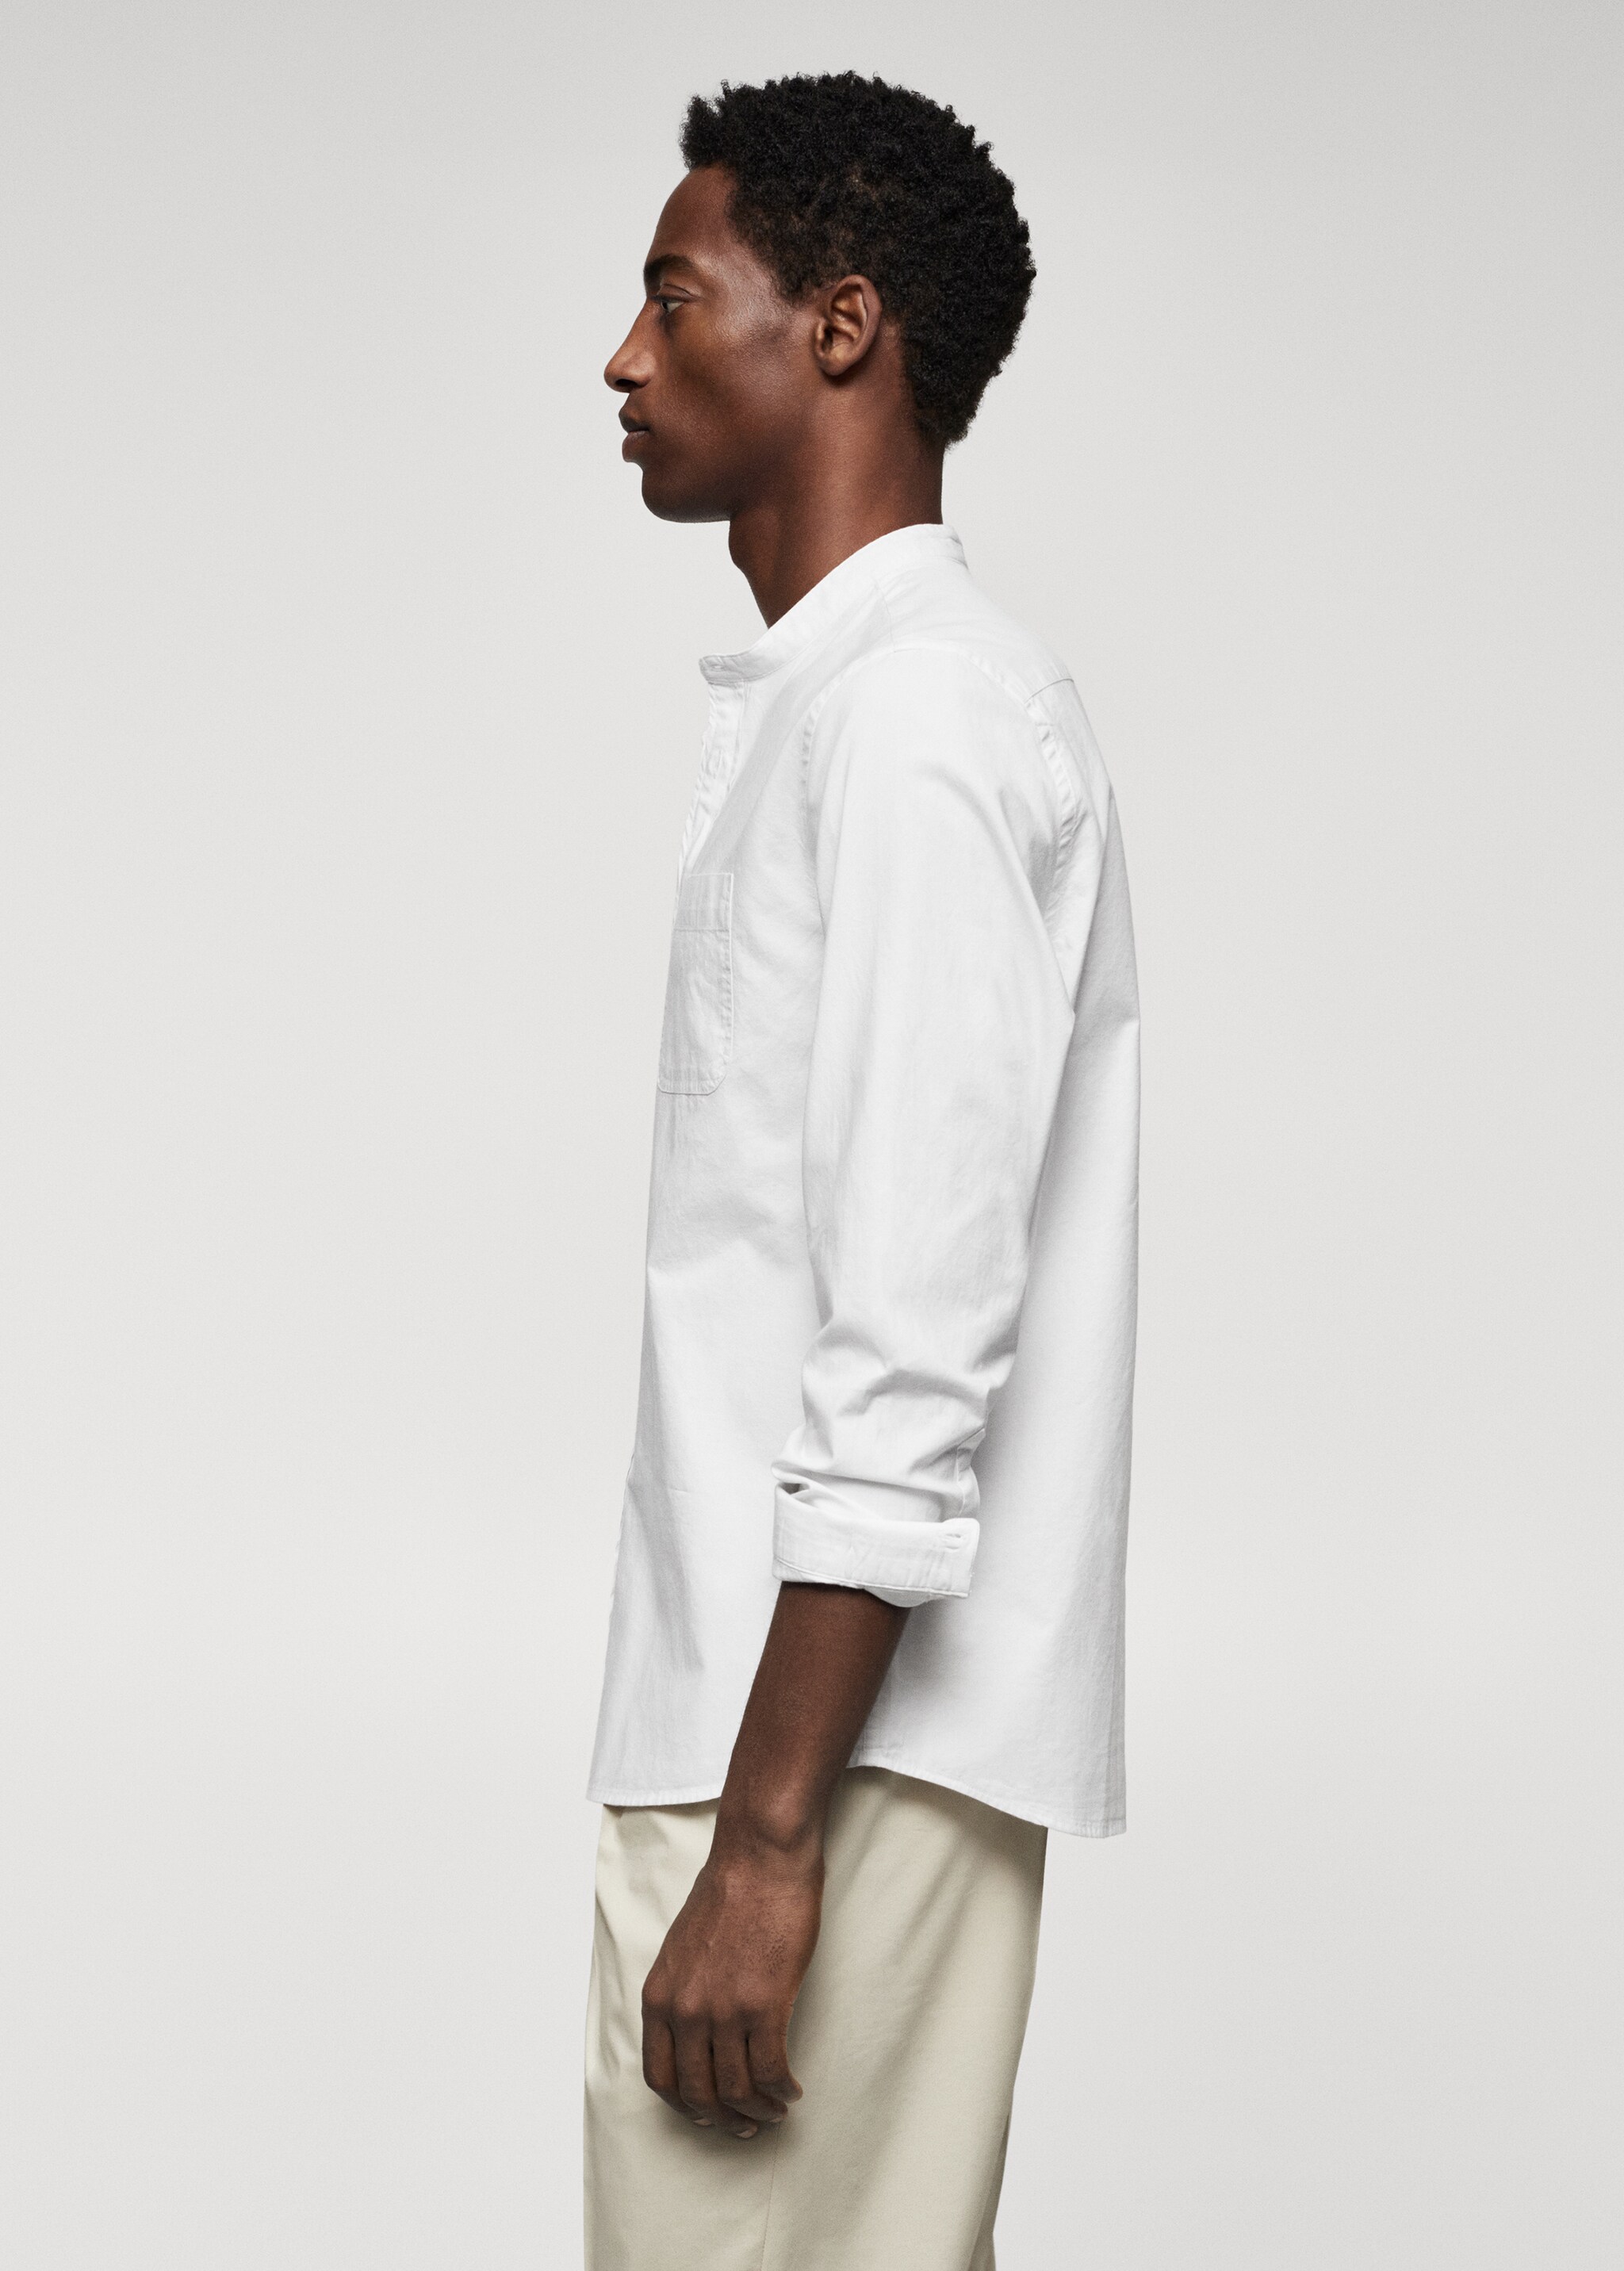 Slim fit Mao collar shirt - Details of the article 6